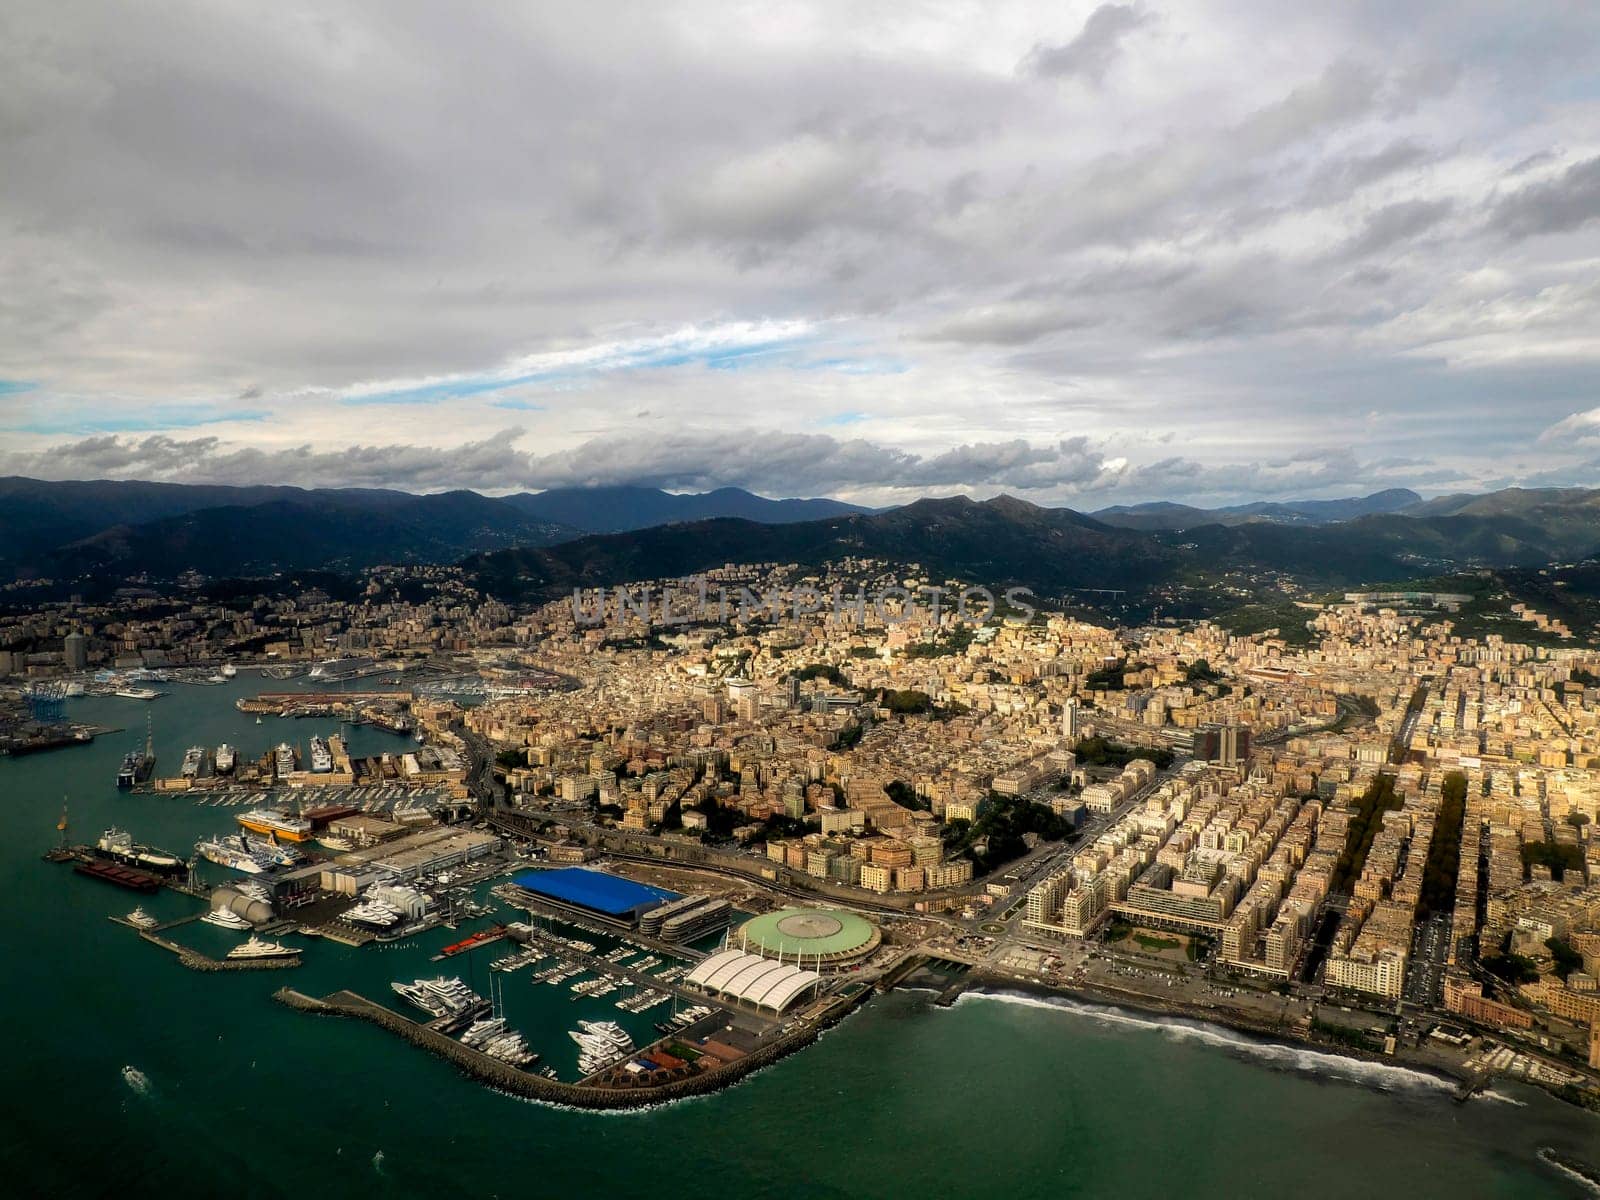 Foce Genoa Italy aerial view before landing to airport by airplane during a sea storm tempest hurricane